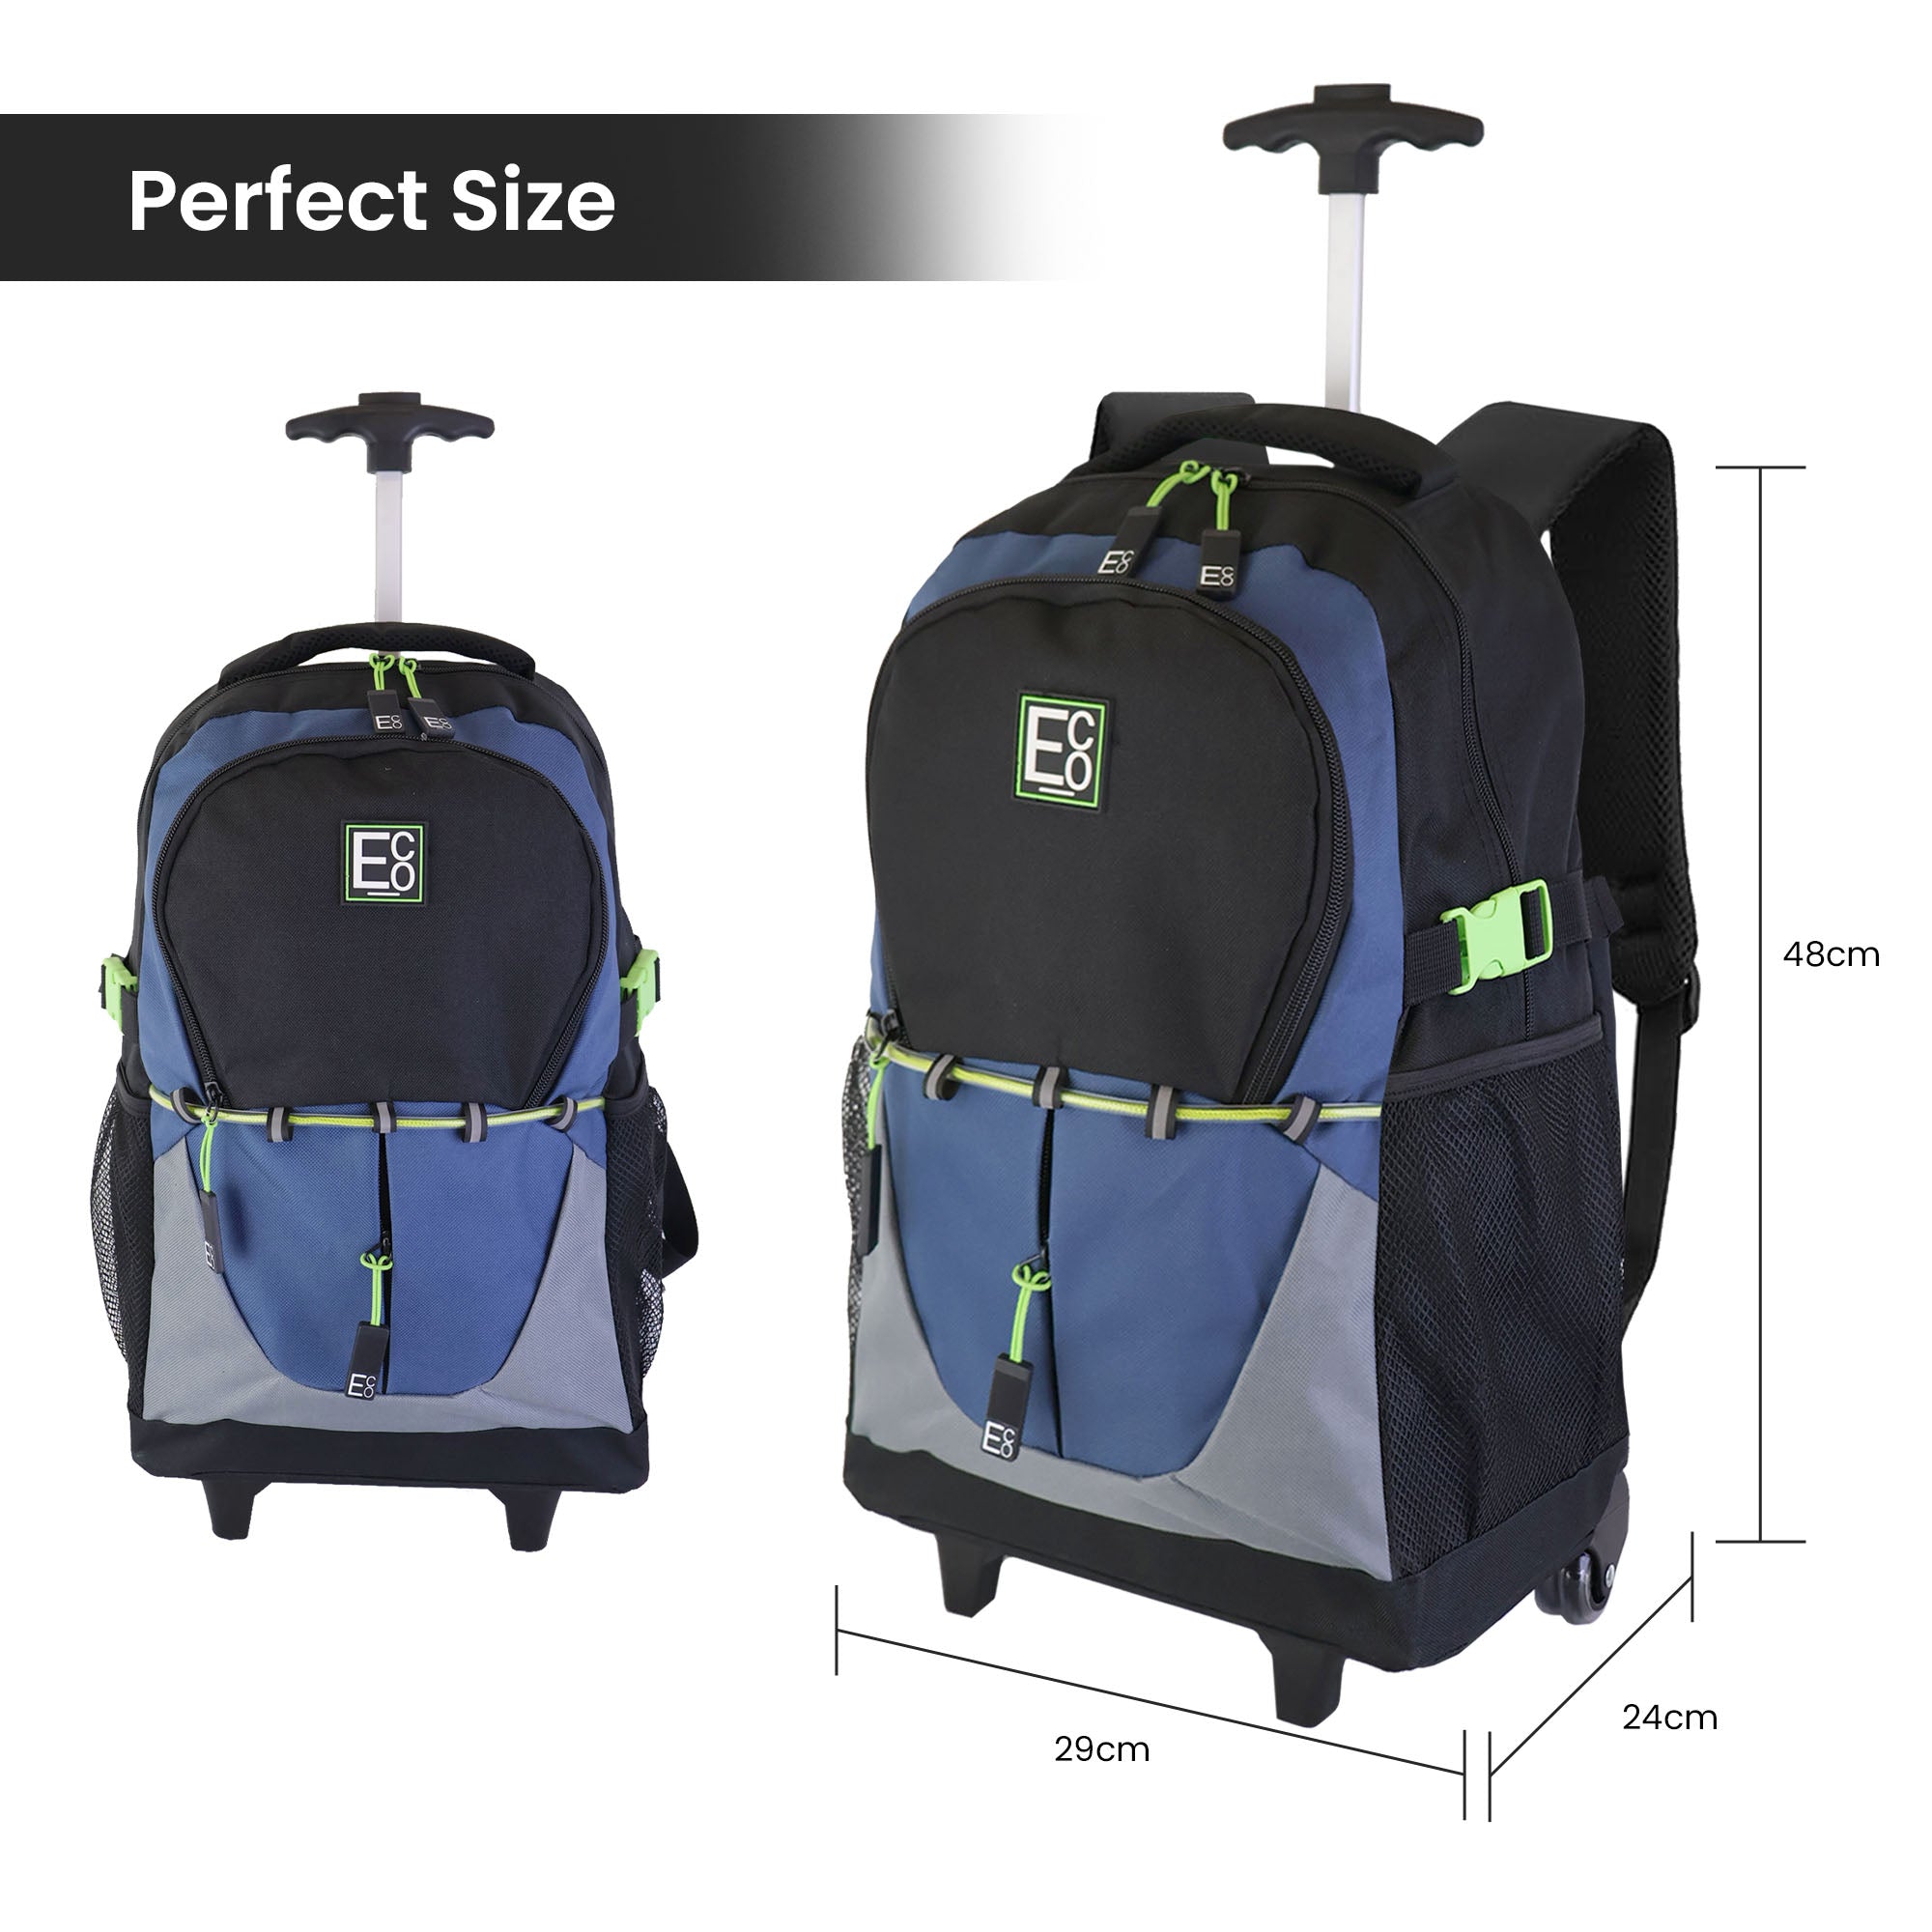 Telescopic Trolley Backpack with Roller Ball Wheels - Navy